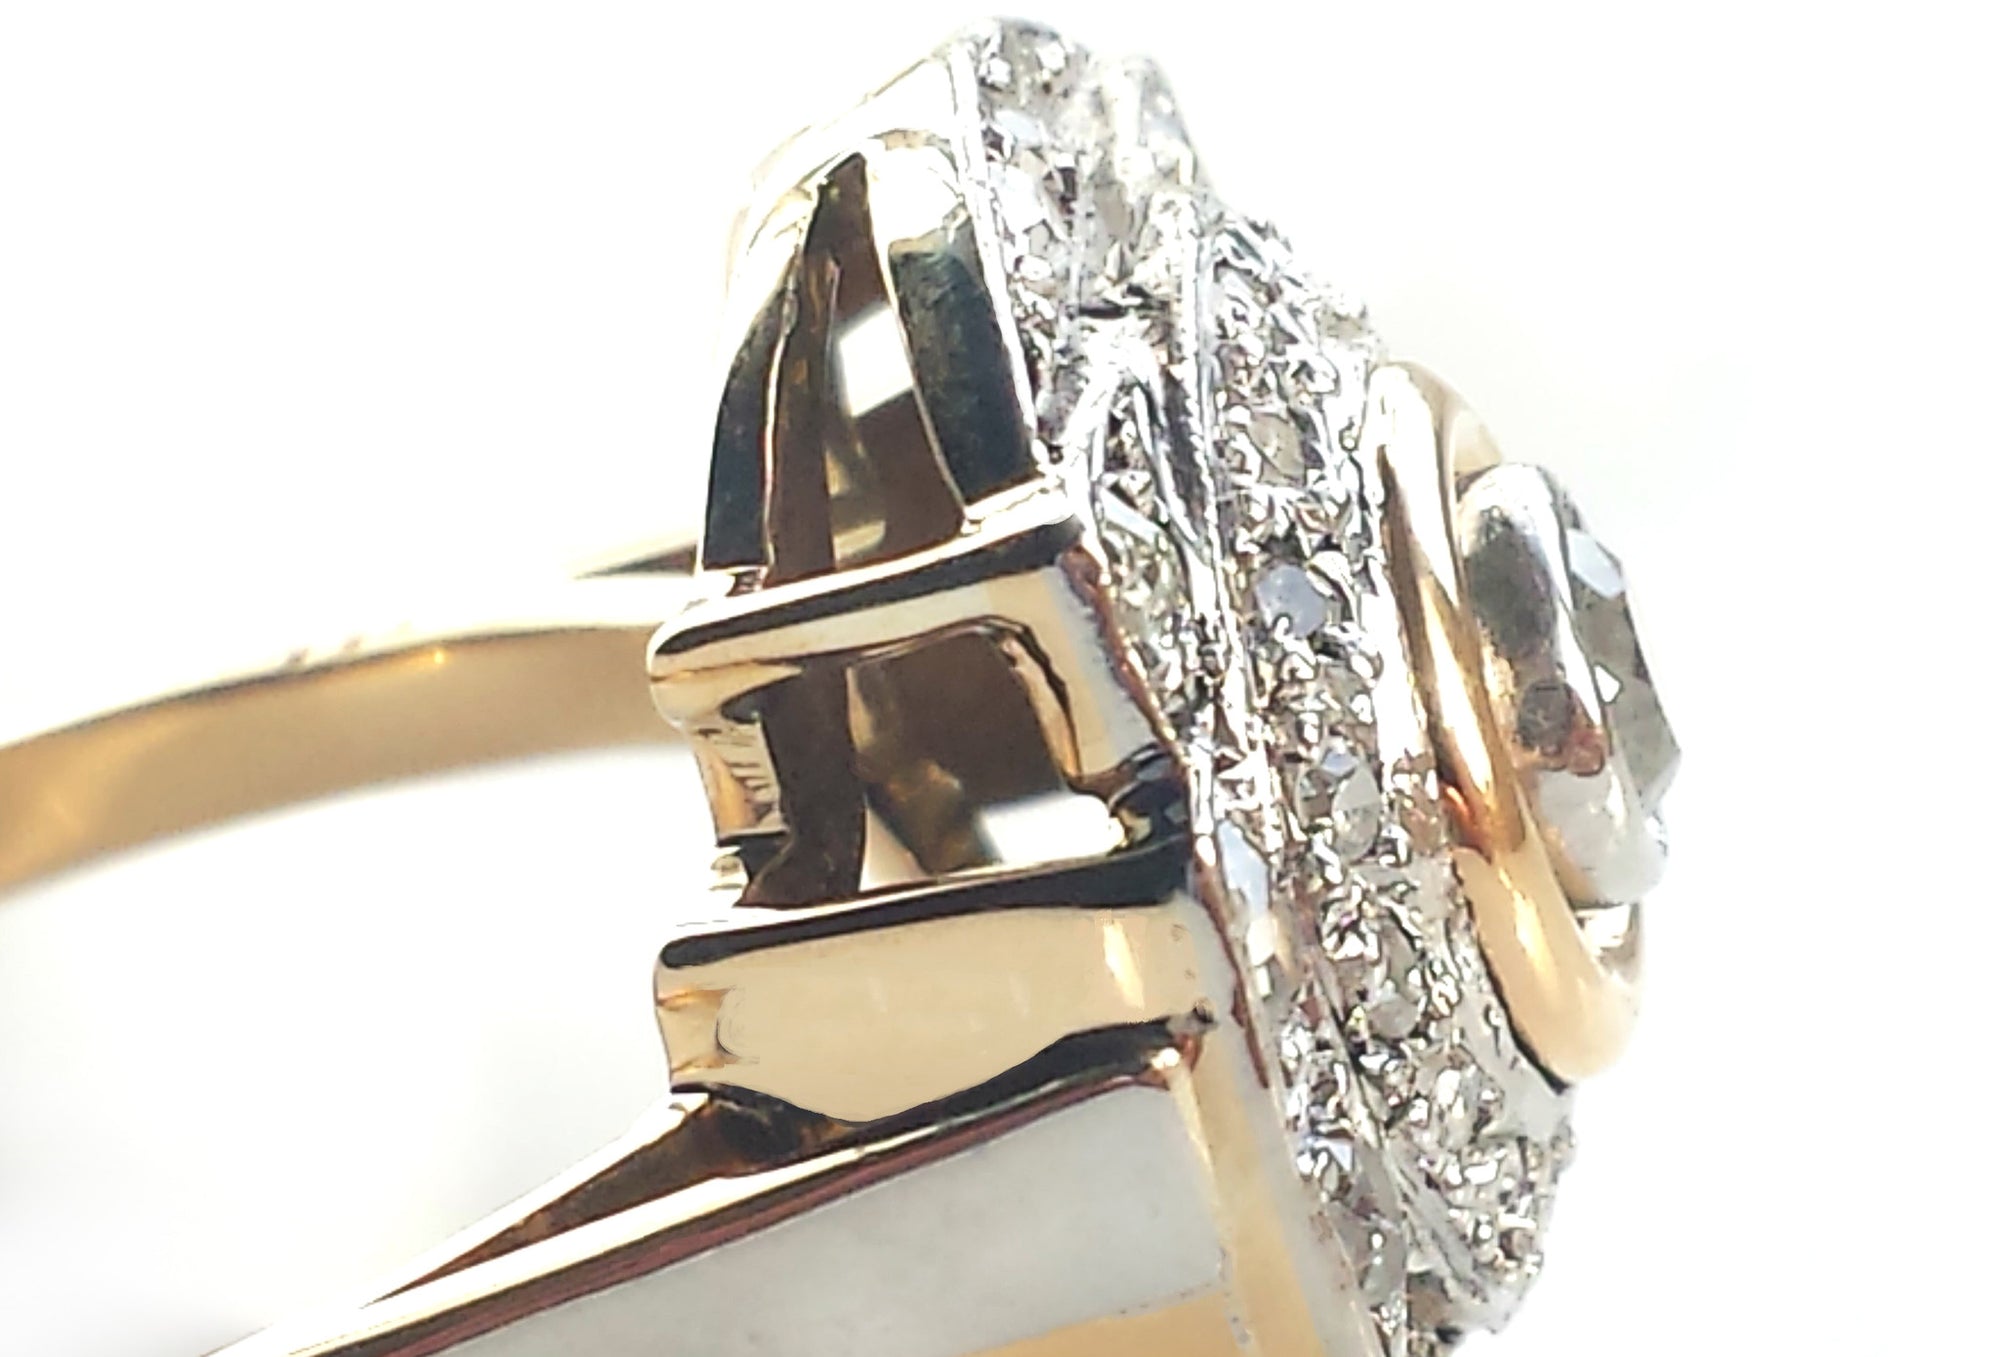 French Art Deco Shield 1.36tcw Diamond Engagement Ring in Platinum & 18k Yellow Gold